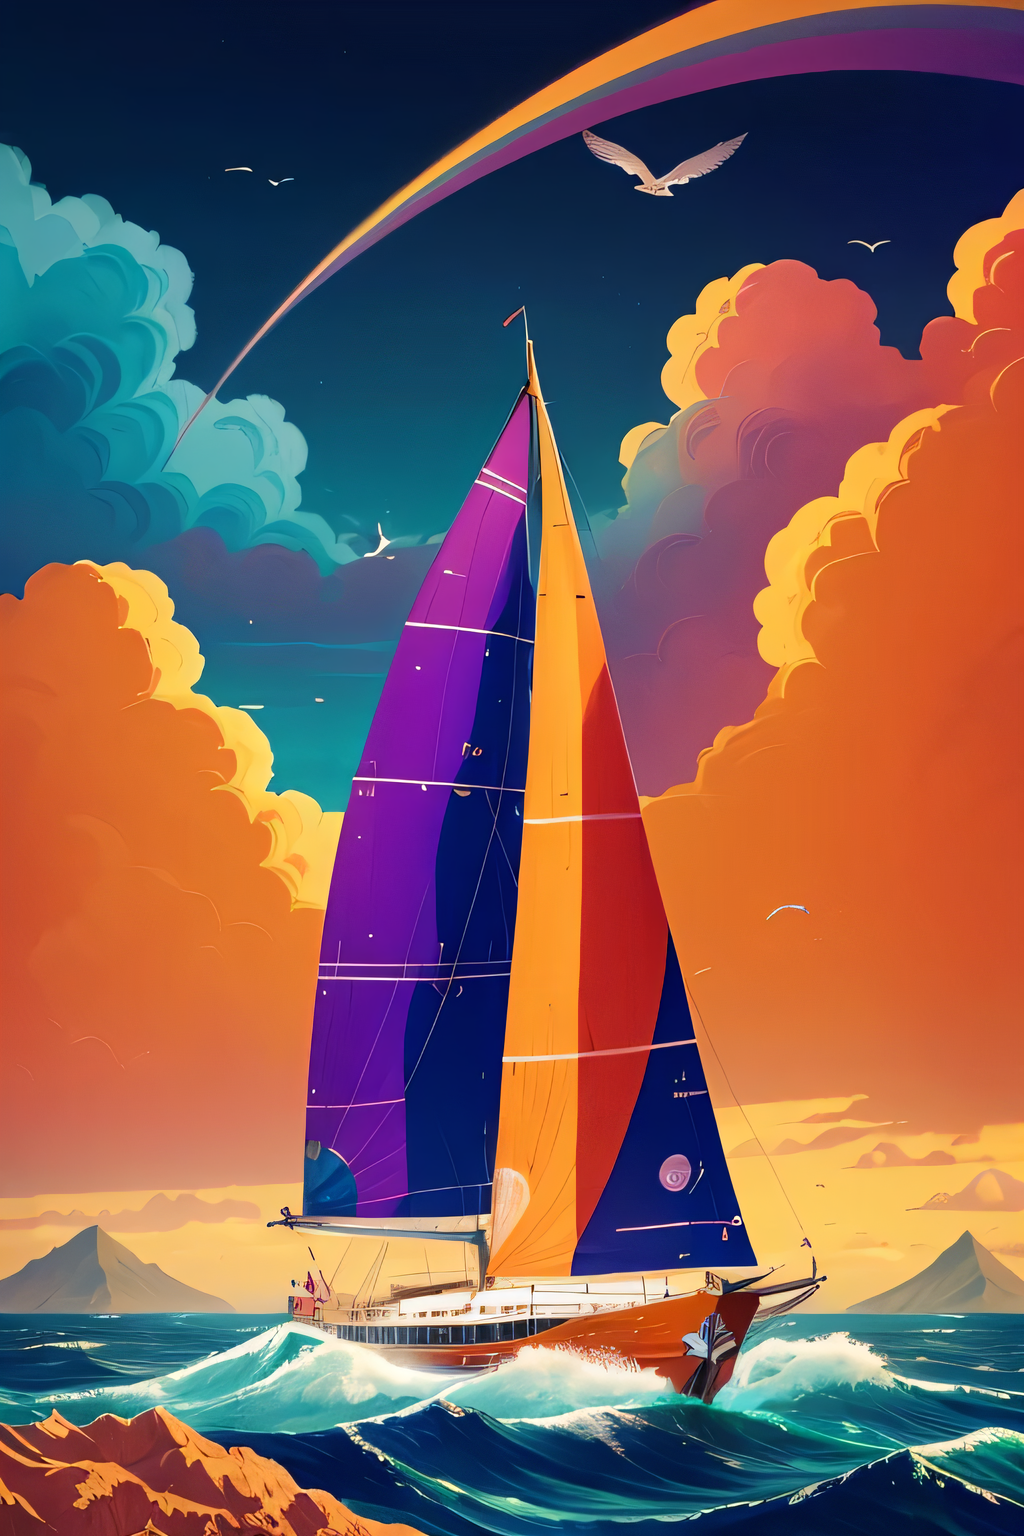 beautiful sunset colors, realistic waves, tranquil atmosphere, skilled brushwork, vibrant and vivid colors, calm and serene ocean.

masterpiece,sharp focus, highly detail, intricate detail on the sailing boat,